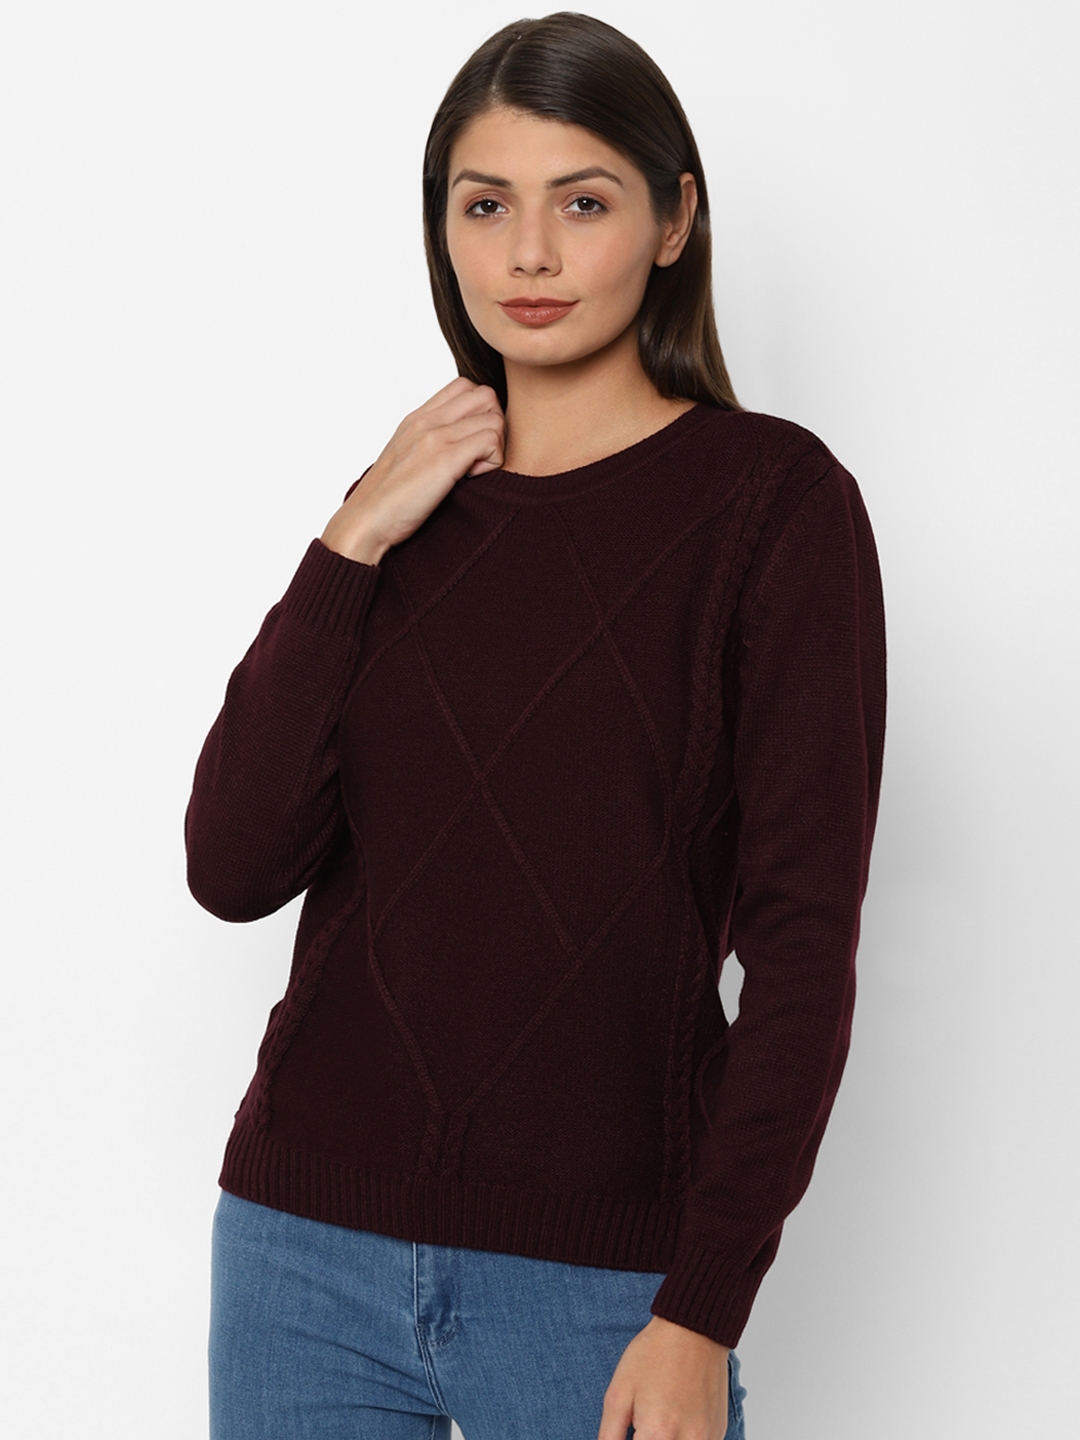 Buy Allen Solly Woman Brown Solid Pullover Sweater - Sweaters for Women ...